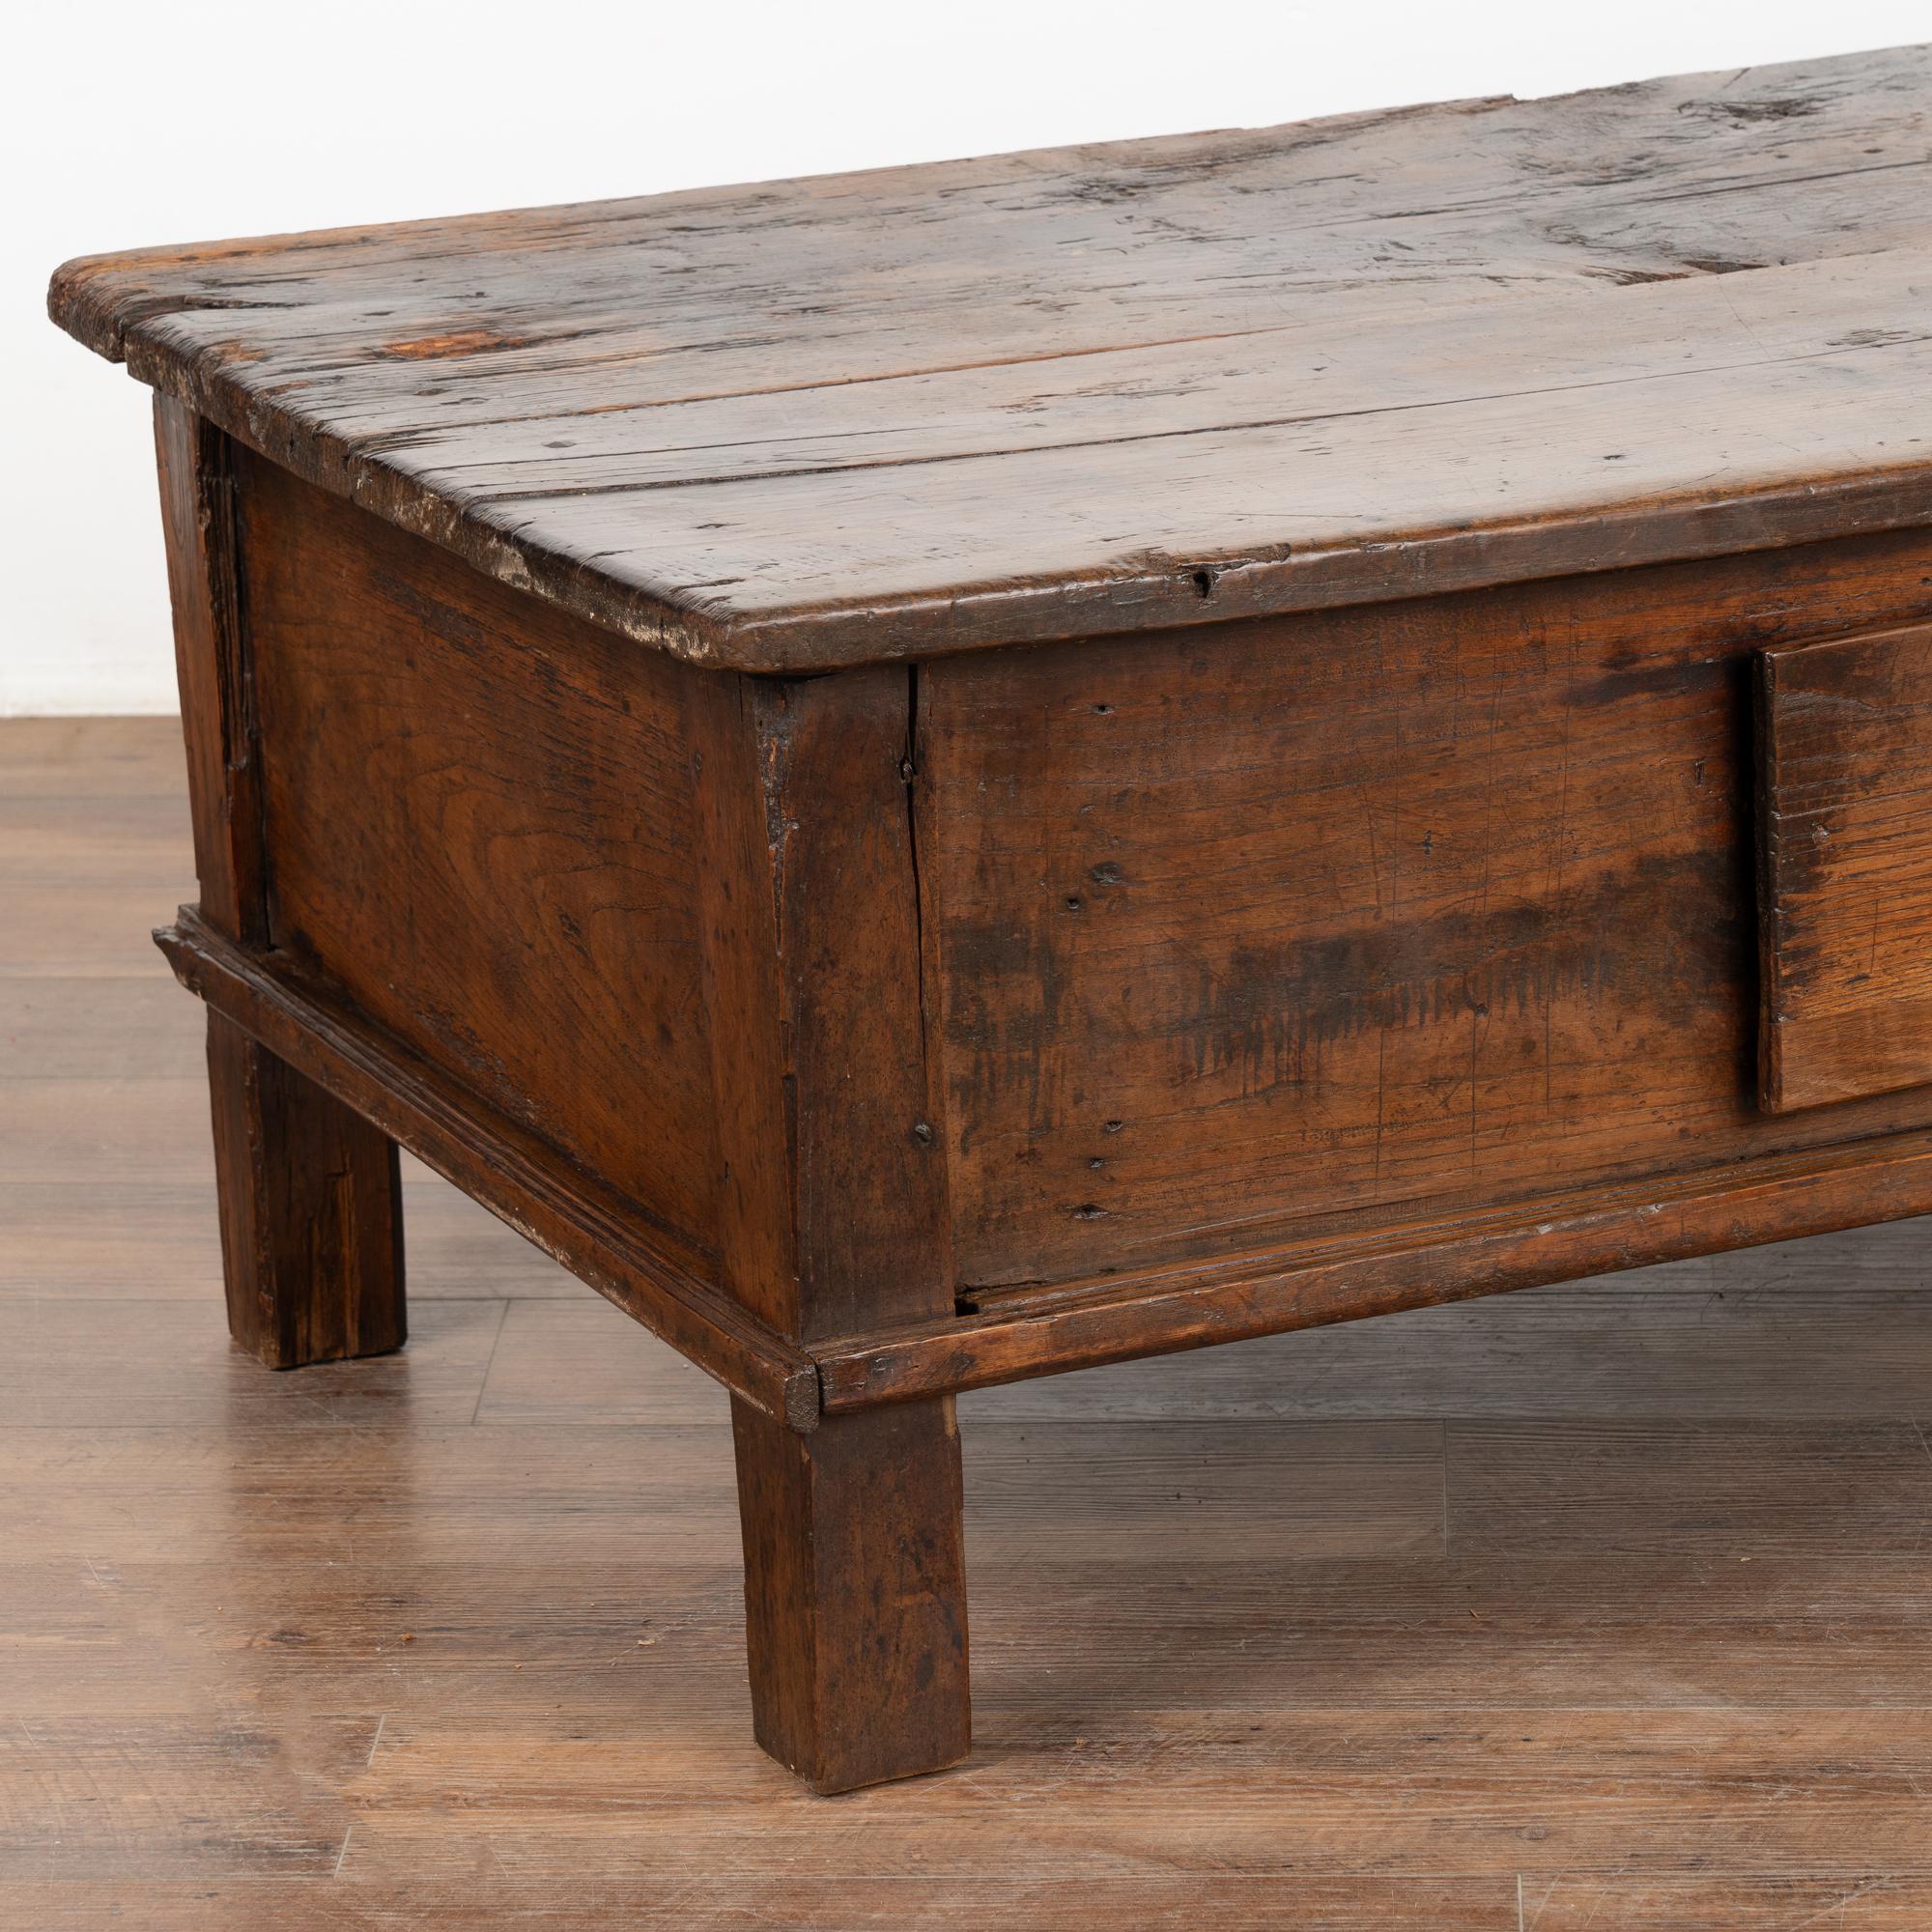 French Country Coffee Table with One Drawer, circa 1820-40 1